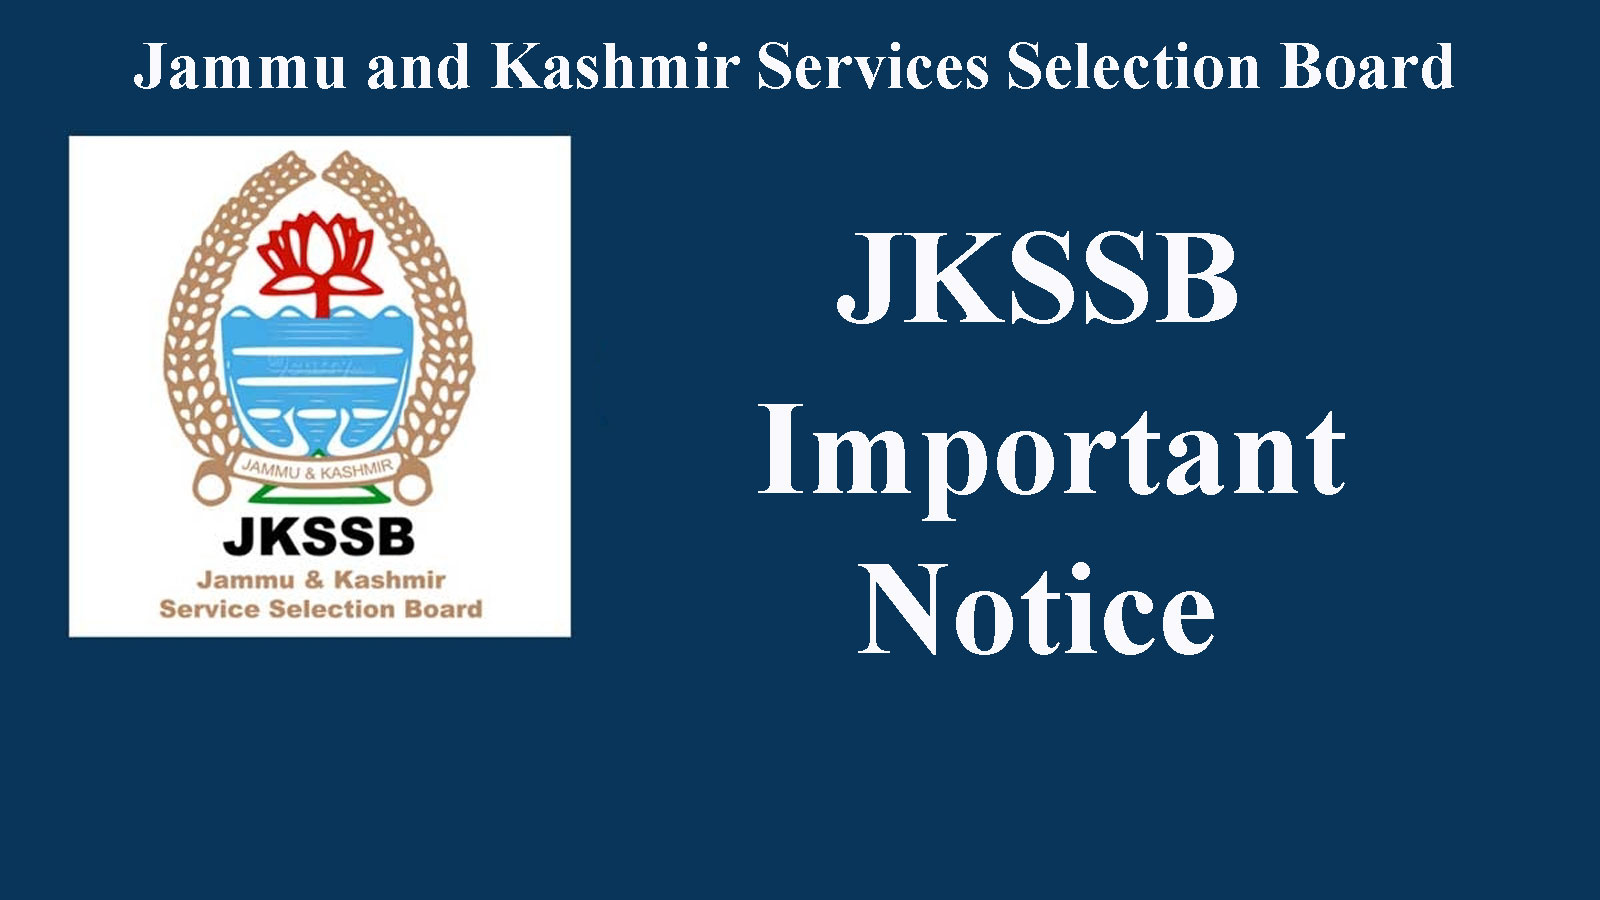 JKSSB Important Notice for Exam of various posts on Nov 29